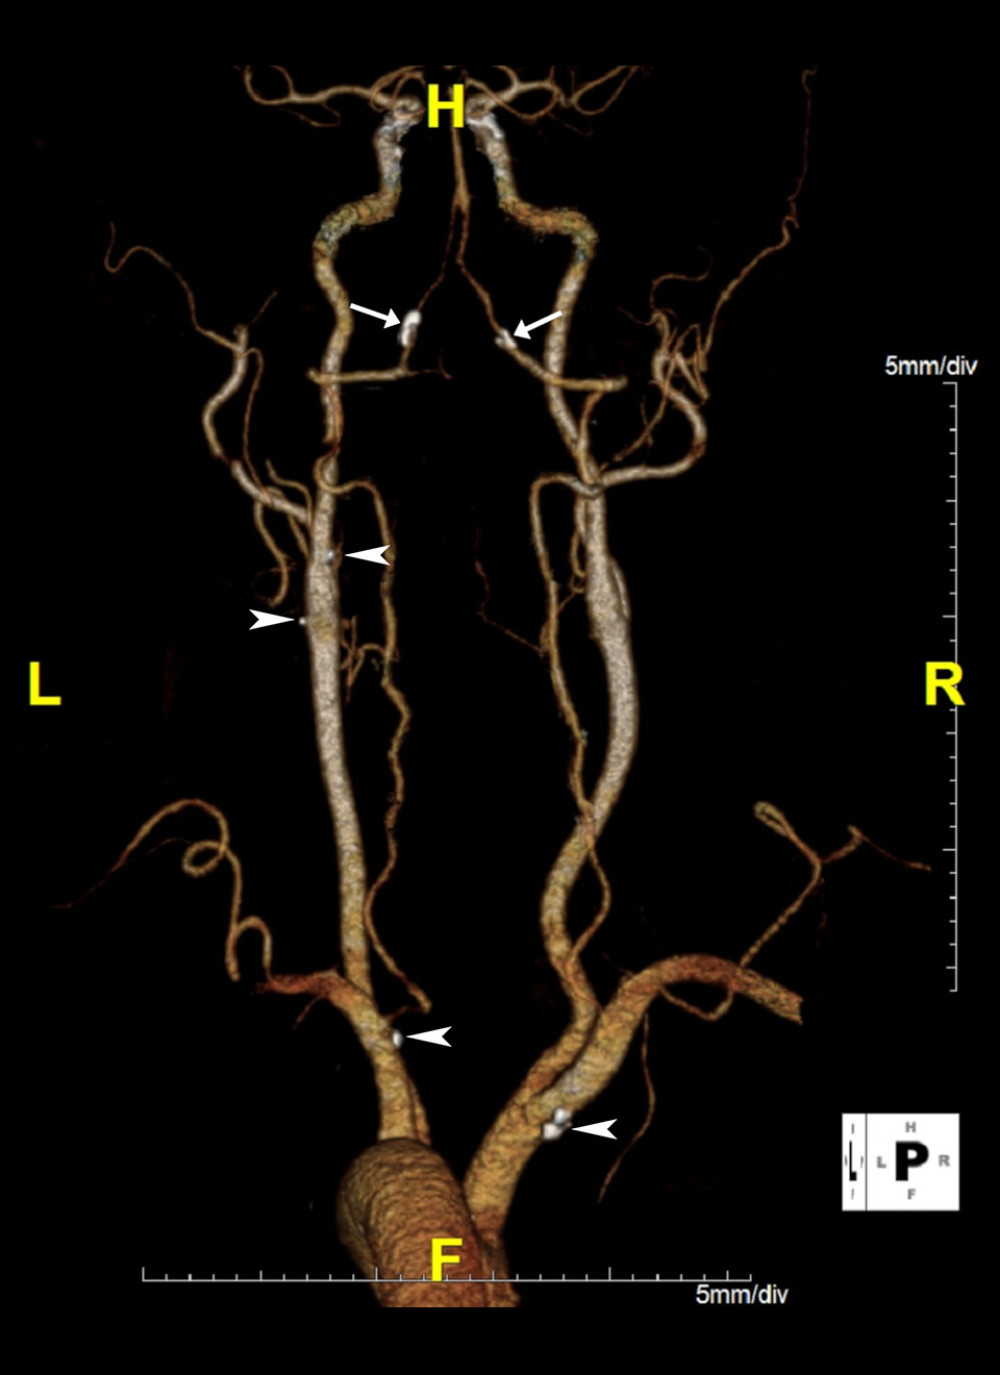 Computed tomography angiogram of neck, 3D volume-rendered image. Orientation: left (L), right (R), head (H), feet (F). Calcified plaques of the vertebral arteries are evident bilaterally (arrows), more prominently on the left than right. From superior to inferior, additional smaller calcified plaques are easily visible at the left carotid bulb (×2), left subclavian artery, and right brachiocephalic trunk (arrowheads).